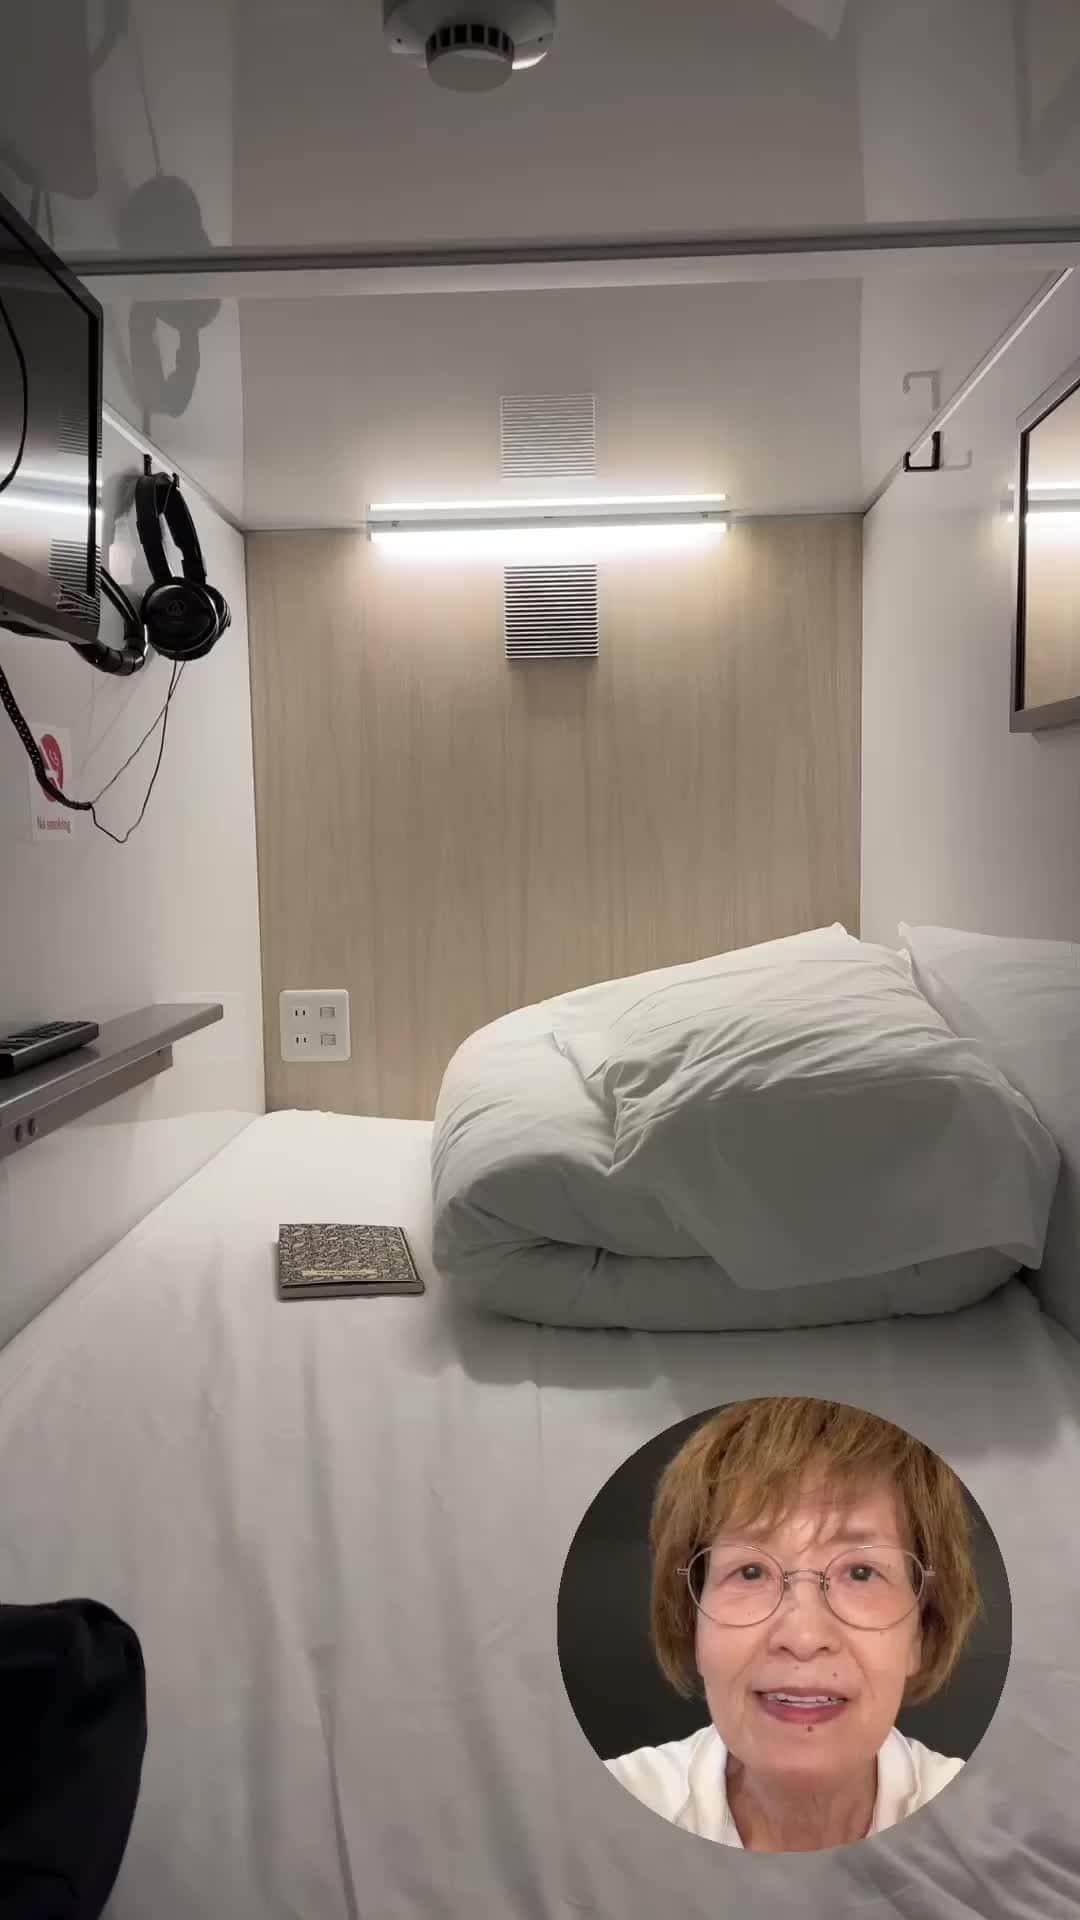 Cooking with Dogのインスタグラム：「My second stay at a capsule hotel (pod hotel) in my life, and it was a hit! I want to stay here again. 😆 "This capsule hotel is new and clean, and it's spacious! It's really nice." 人生で2度目のカプセルホテル、当たりだった！また泊まりたい(笑)👩‍🍳😍「このカプセルホテル新しくて綺麗でね、広い！とってもいいわ」」